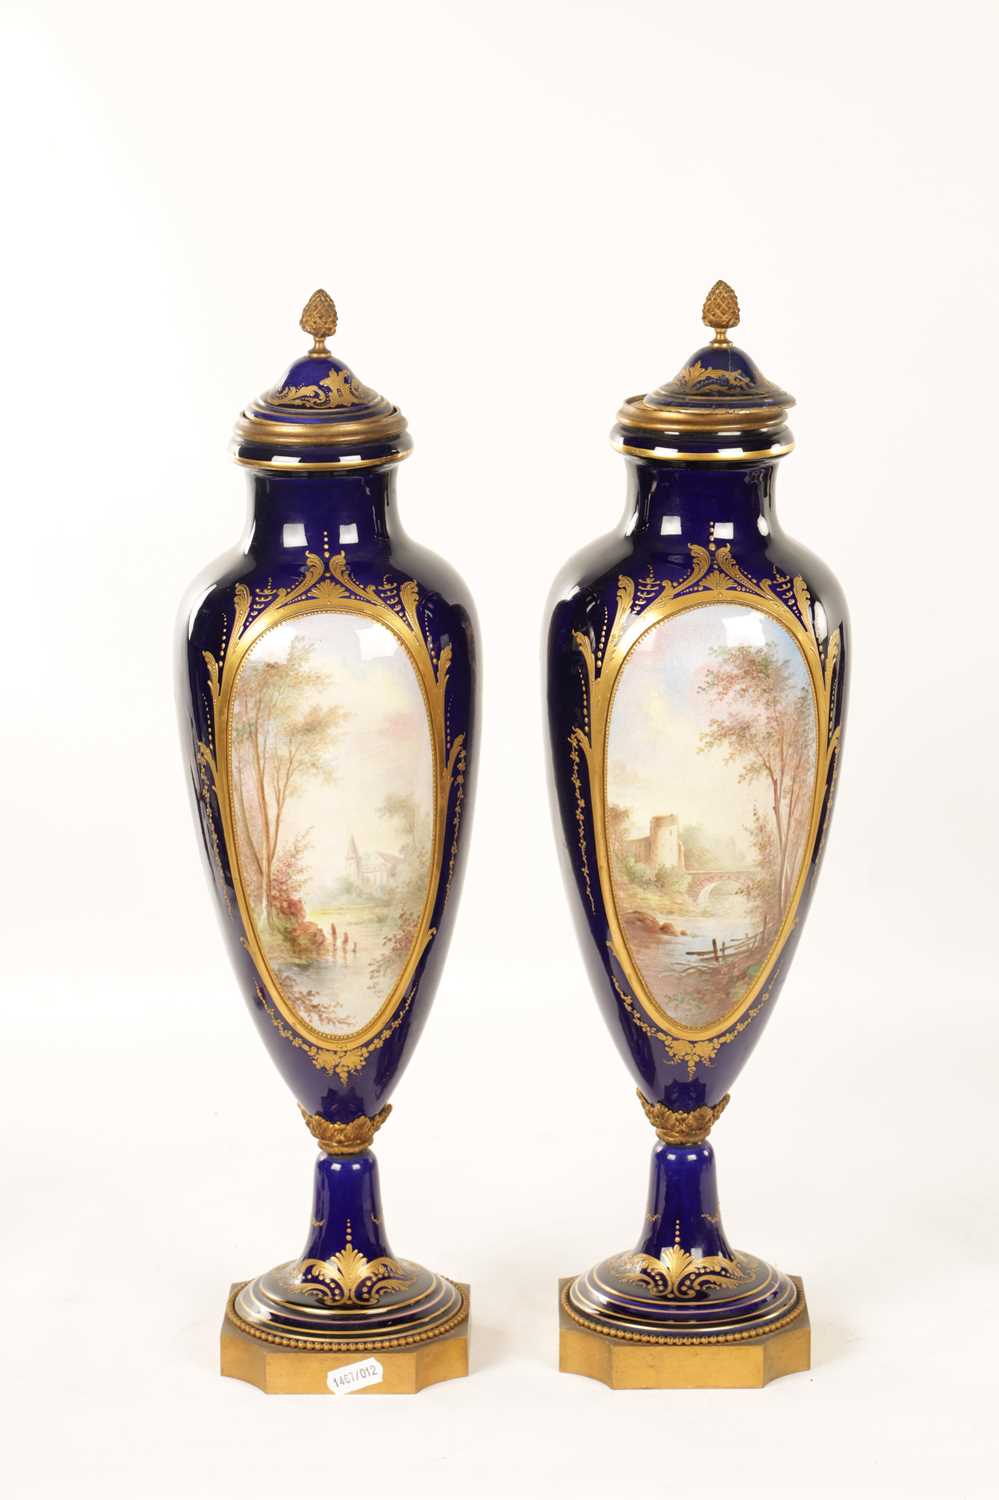 A PAIR OF LATE 19TH-CENTURY SERVES STYLE PORCELAIN LARGE CABINET VASES - Image 15 of 20